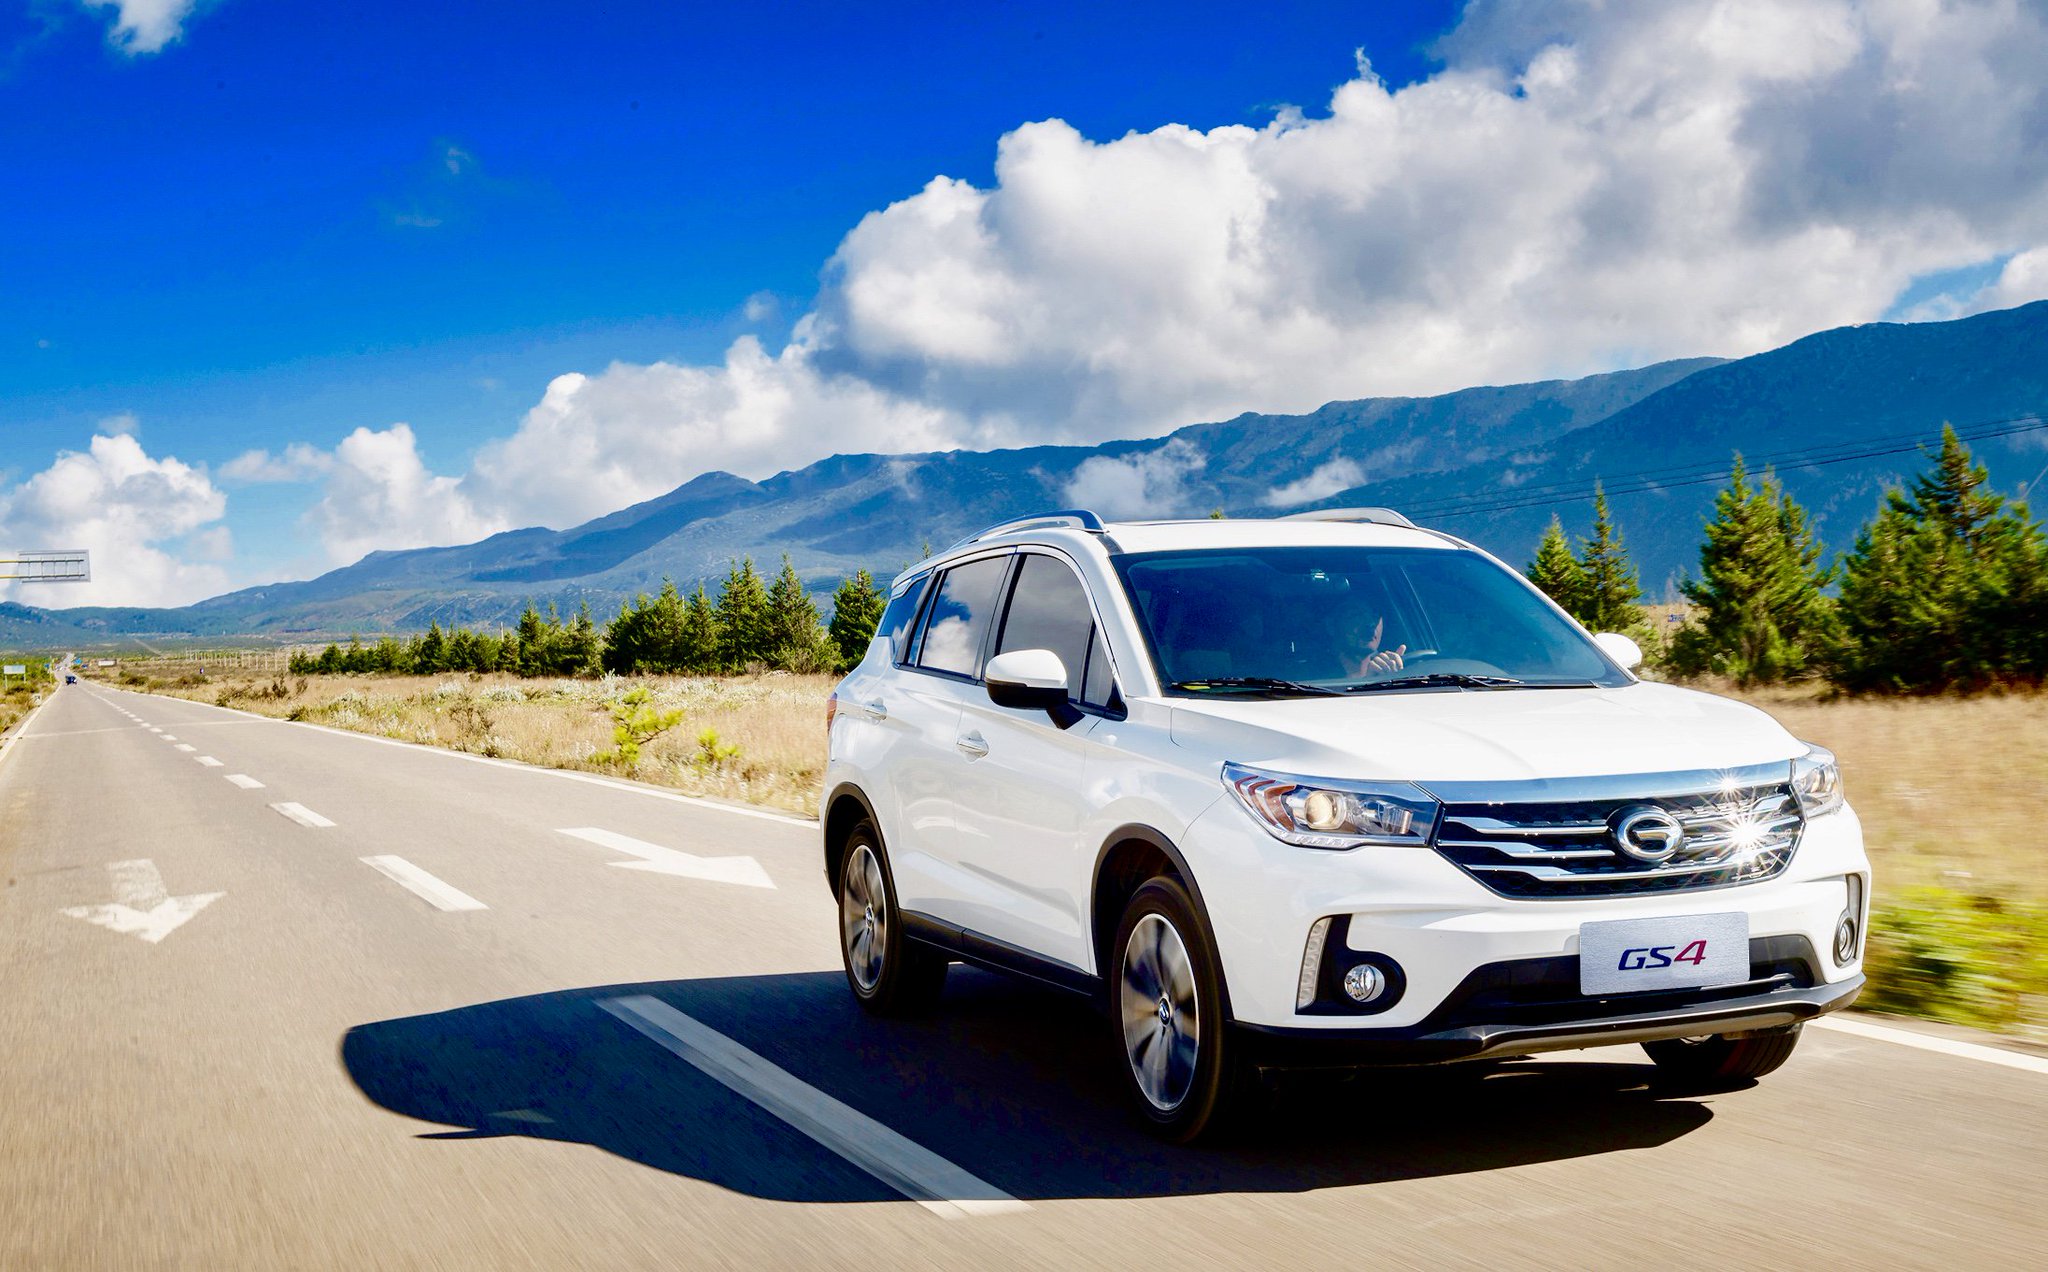 Gac Motor Meet The Gs4 A Compact Yet Powerful Off Road Suv That Takes You Anywhere Gacmotor Gs4 Suv Dailycar Drivingpleasure Carlifestyle T Co Aijzzjvpab